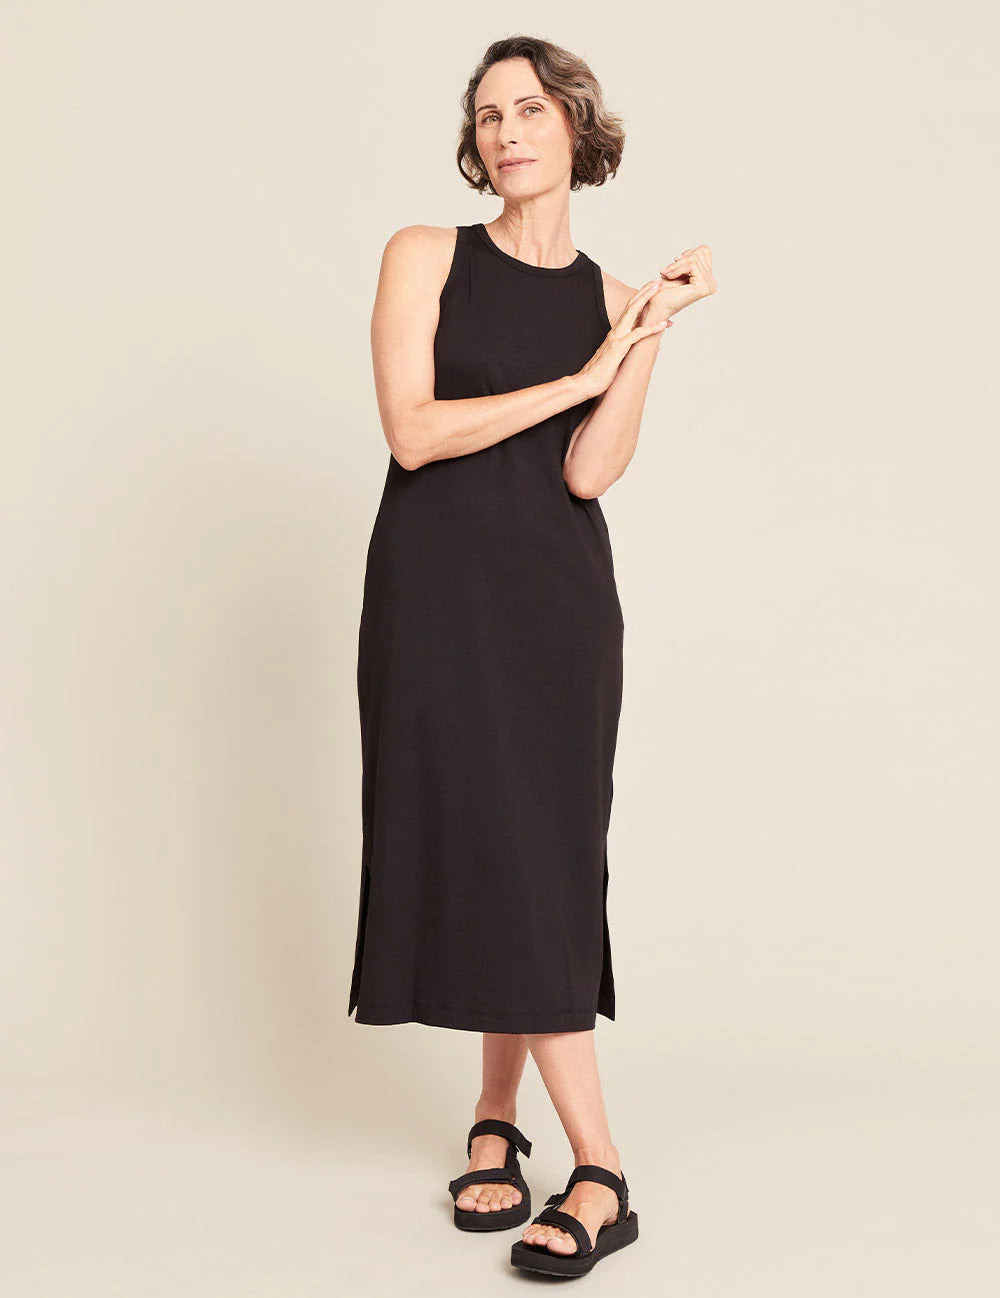 boody racerback dress in black front view